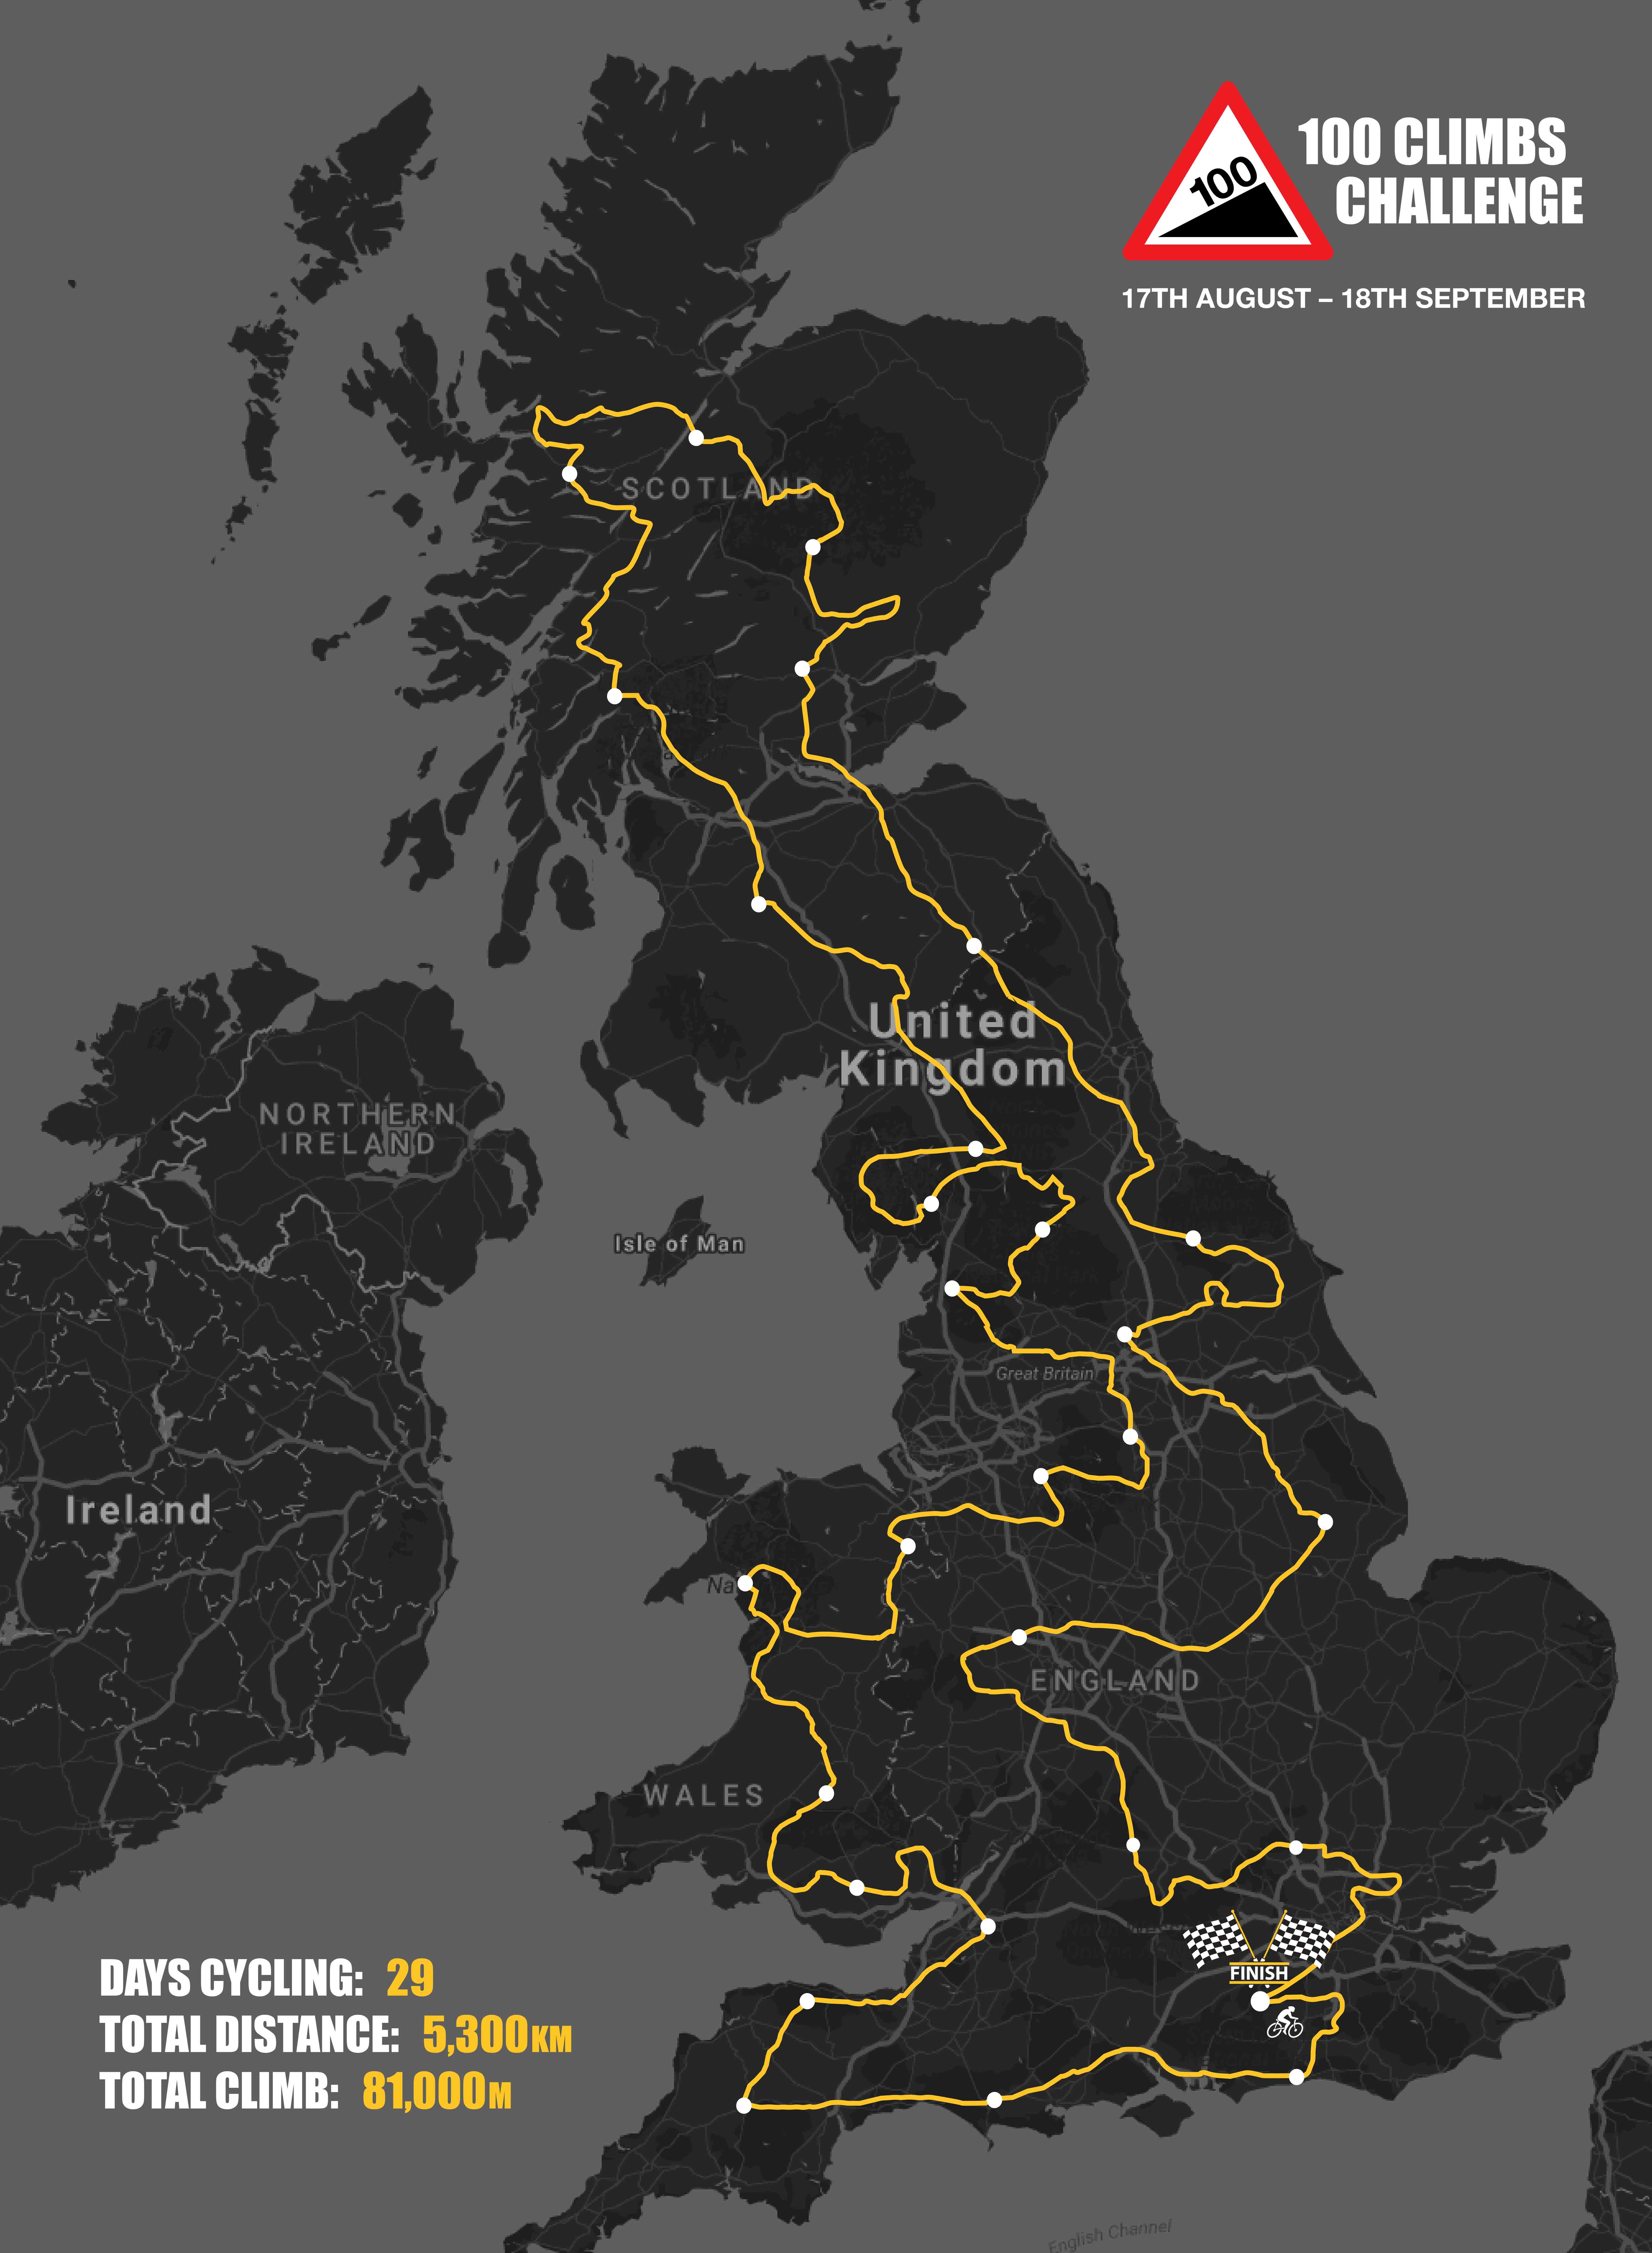 The entire route map